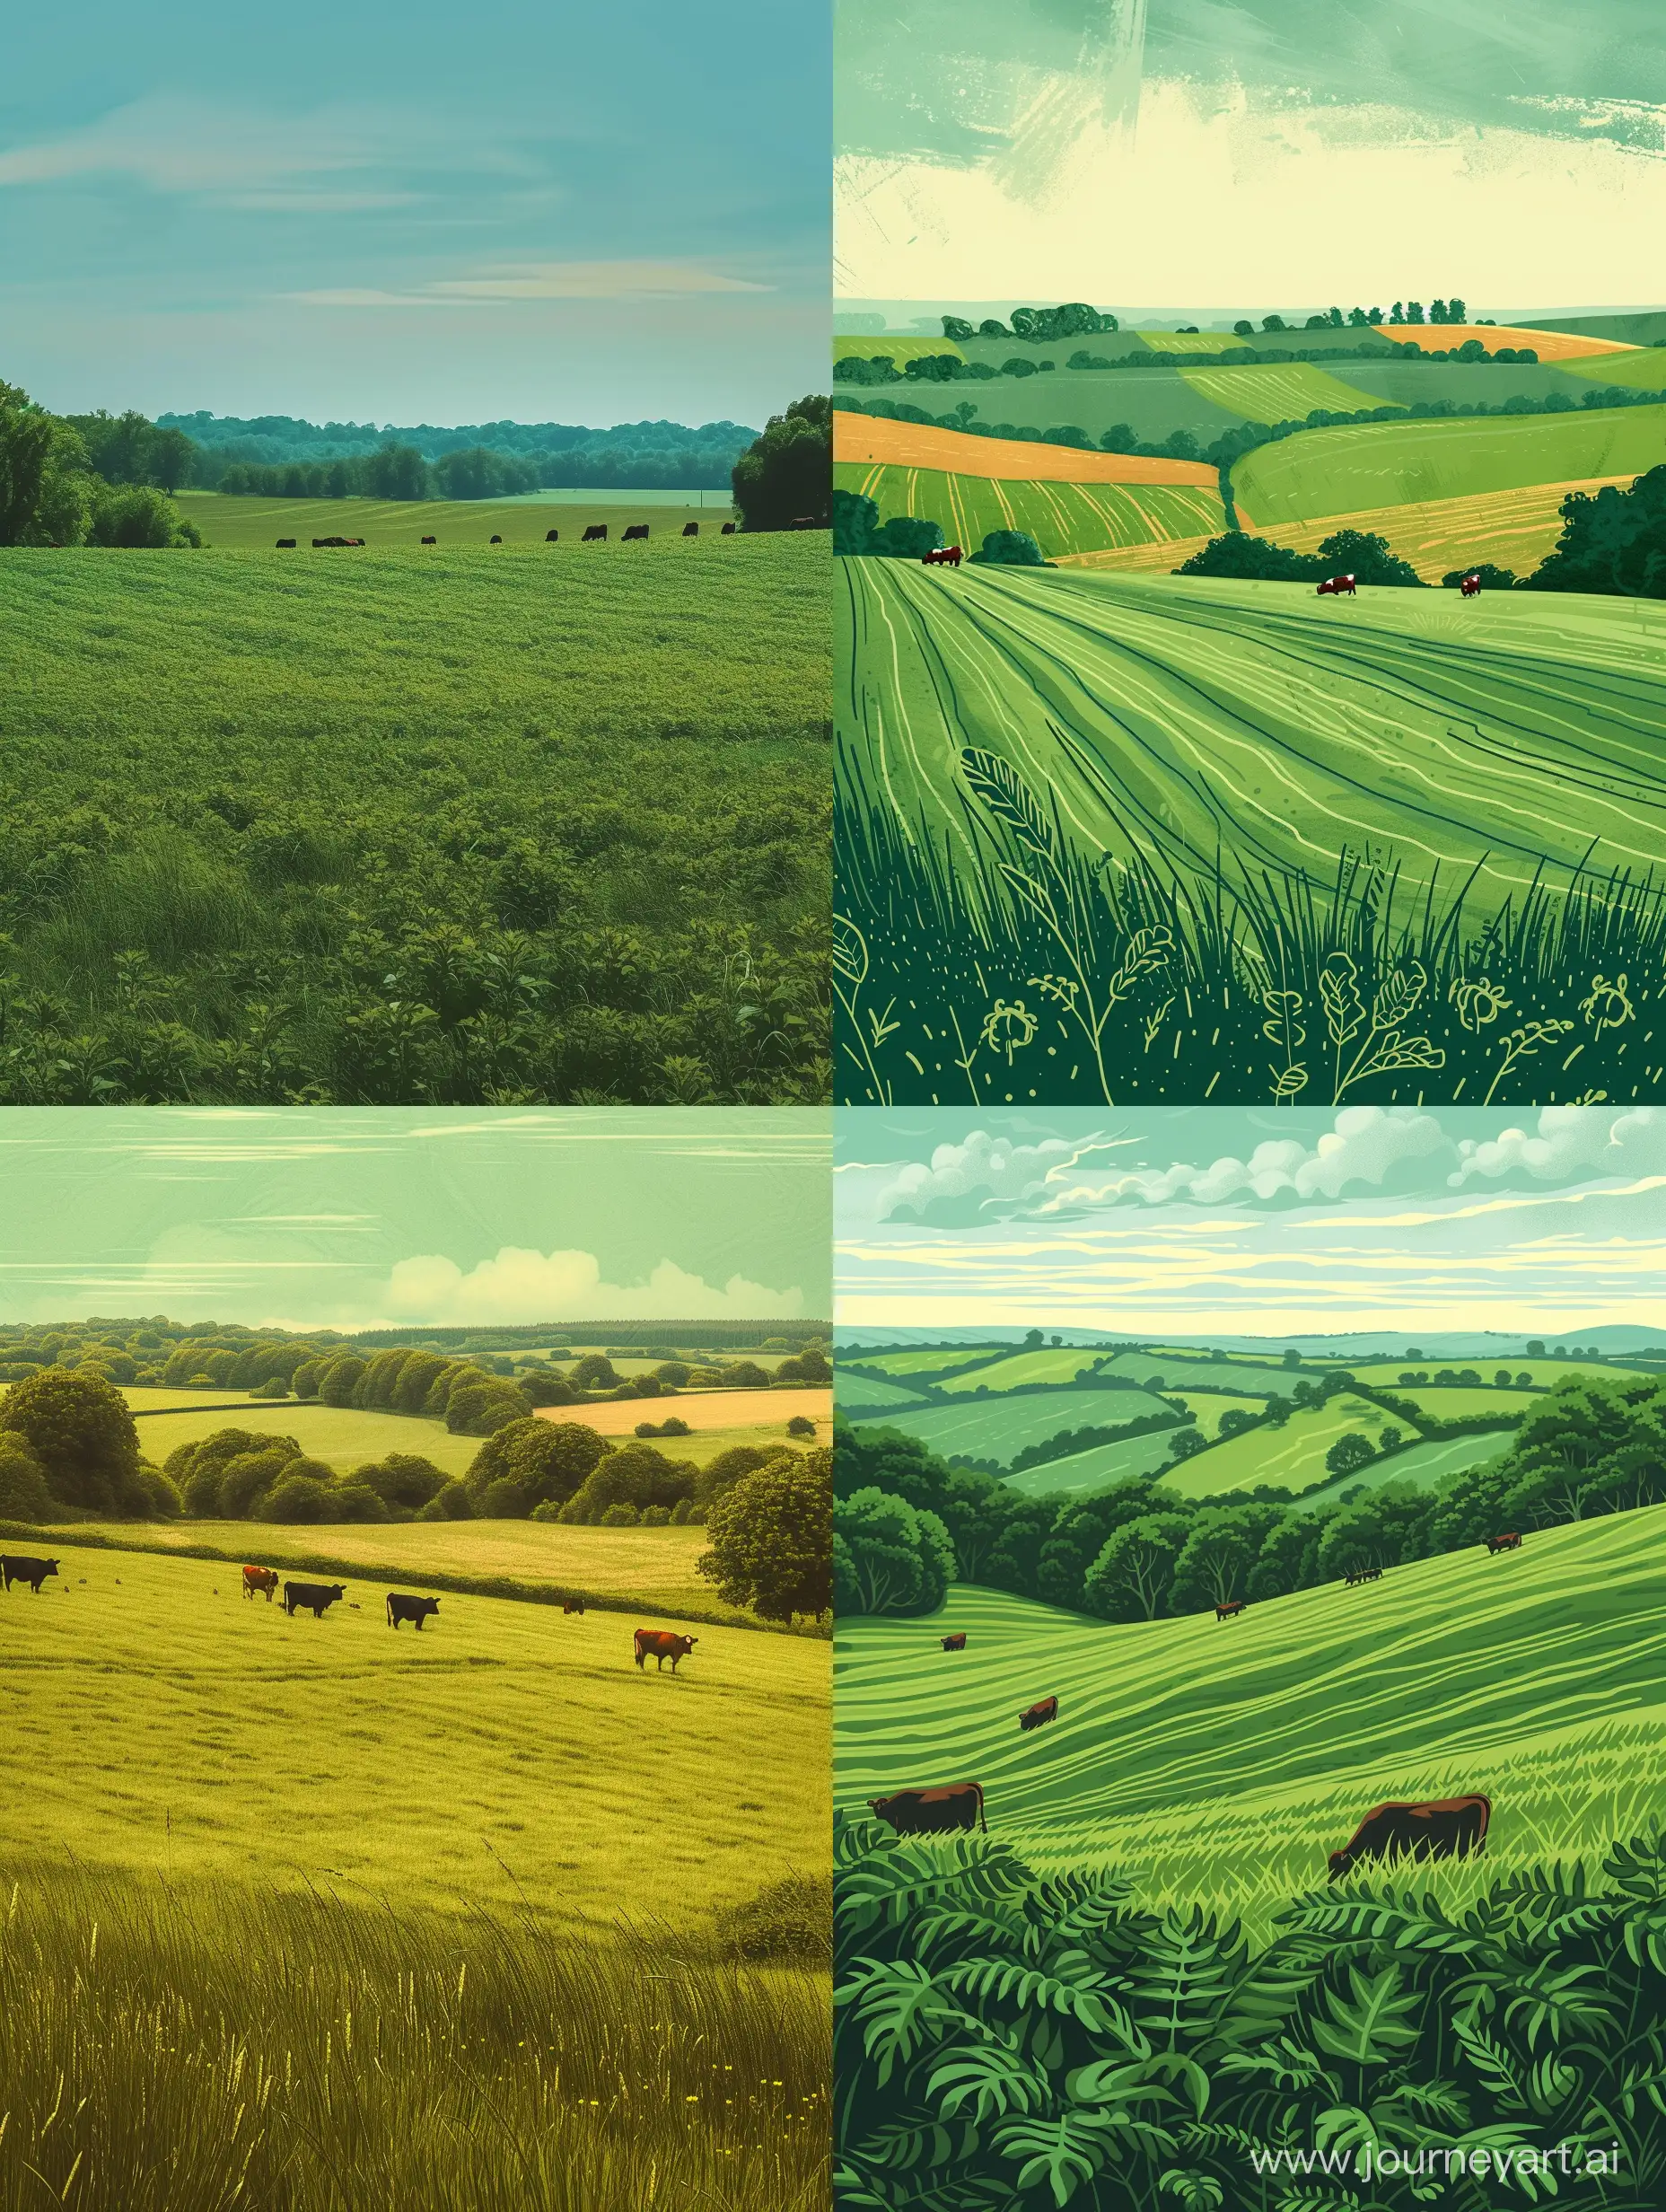 Farm field vibrant green colors some cows and trees far away in old style illustration, Highly detailed, CS 5:7